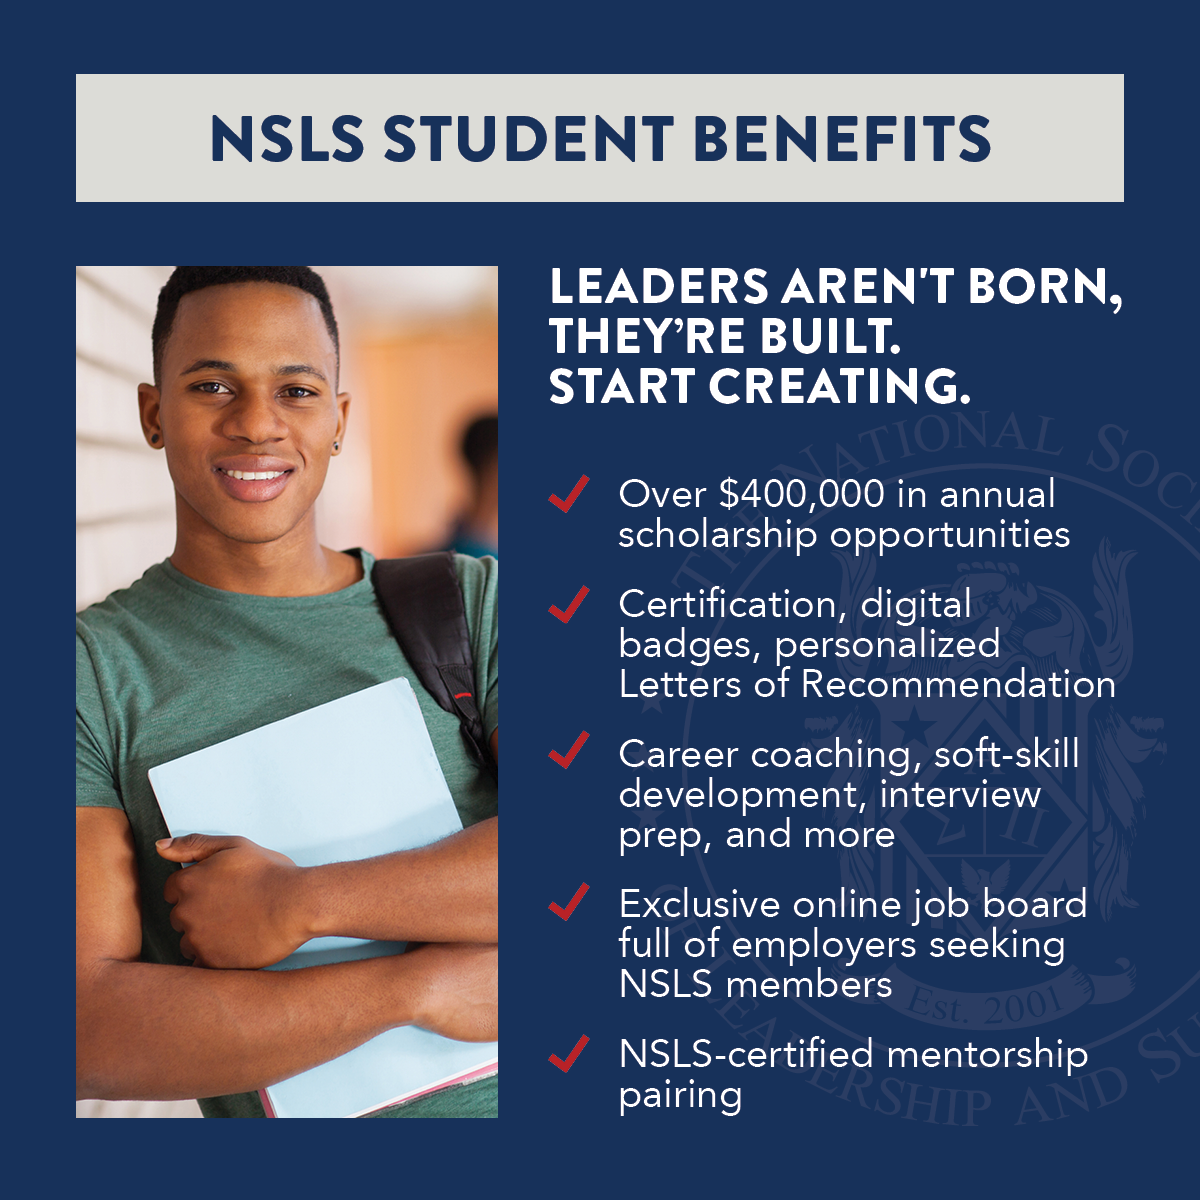 On the left side, a student in a green shirt with a backpack on one shoulder holds a notebook for a portrait. On the right is a bullet list of NSLS student benefits, which includes: over $400,000 in annual scholarship opportunities; certification, digital badges, and personalized letters of recommendation; career coaching, soft-skill development, interview prep, and more; exclusive online job board full of employers seeking NSLS members; NSLS-certified mentorship pairing.